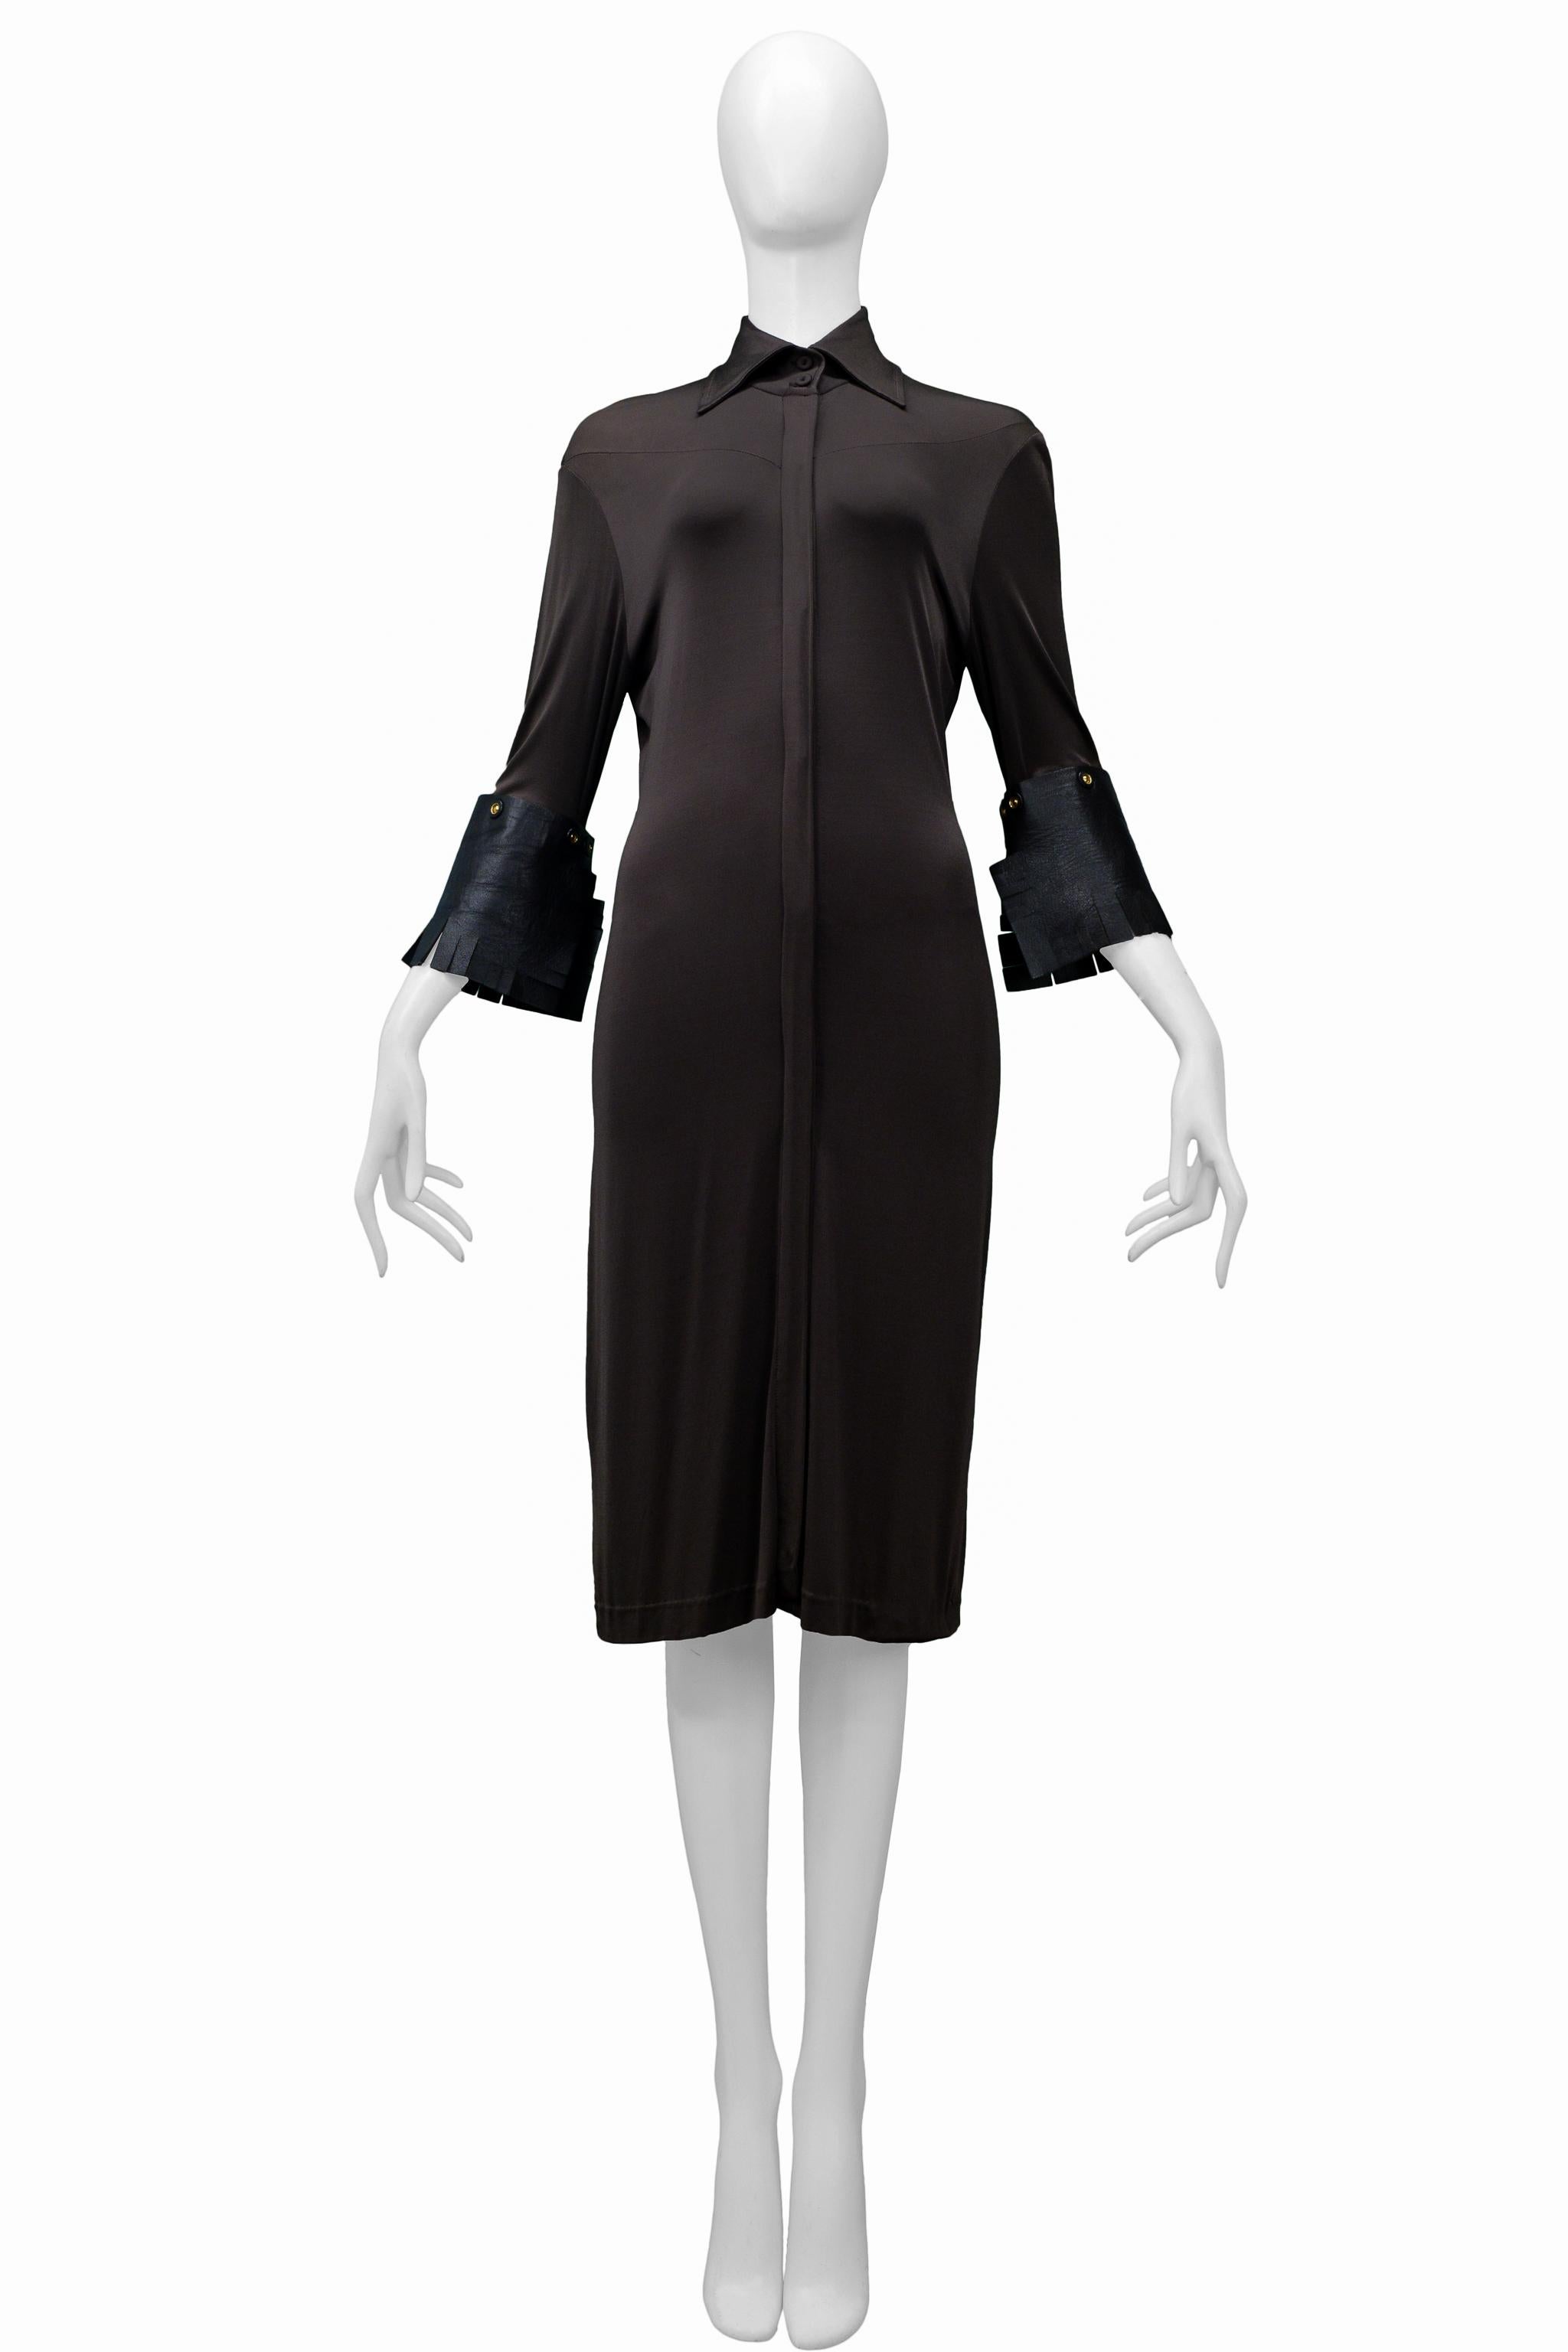 Resurrection Vintage is excited to offer a vintage Gianfranco Ferre brown jersey dress featuring decorative gold buttons, large leather cuffs with fringe, front placket, and folding collar. 

Gianfranco Ferre
Size S/M
95% Jersey, 5% Elastic,